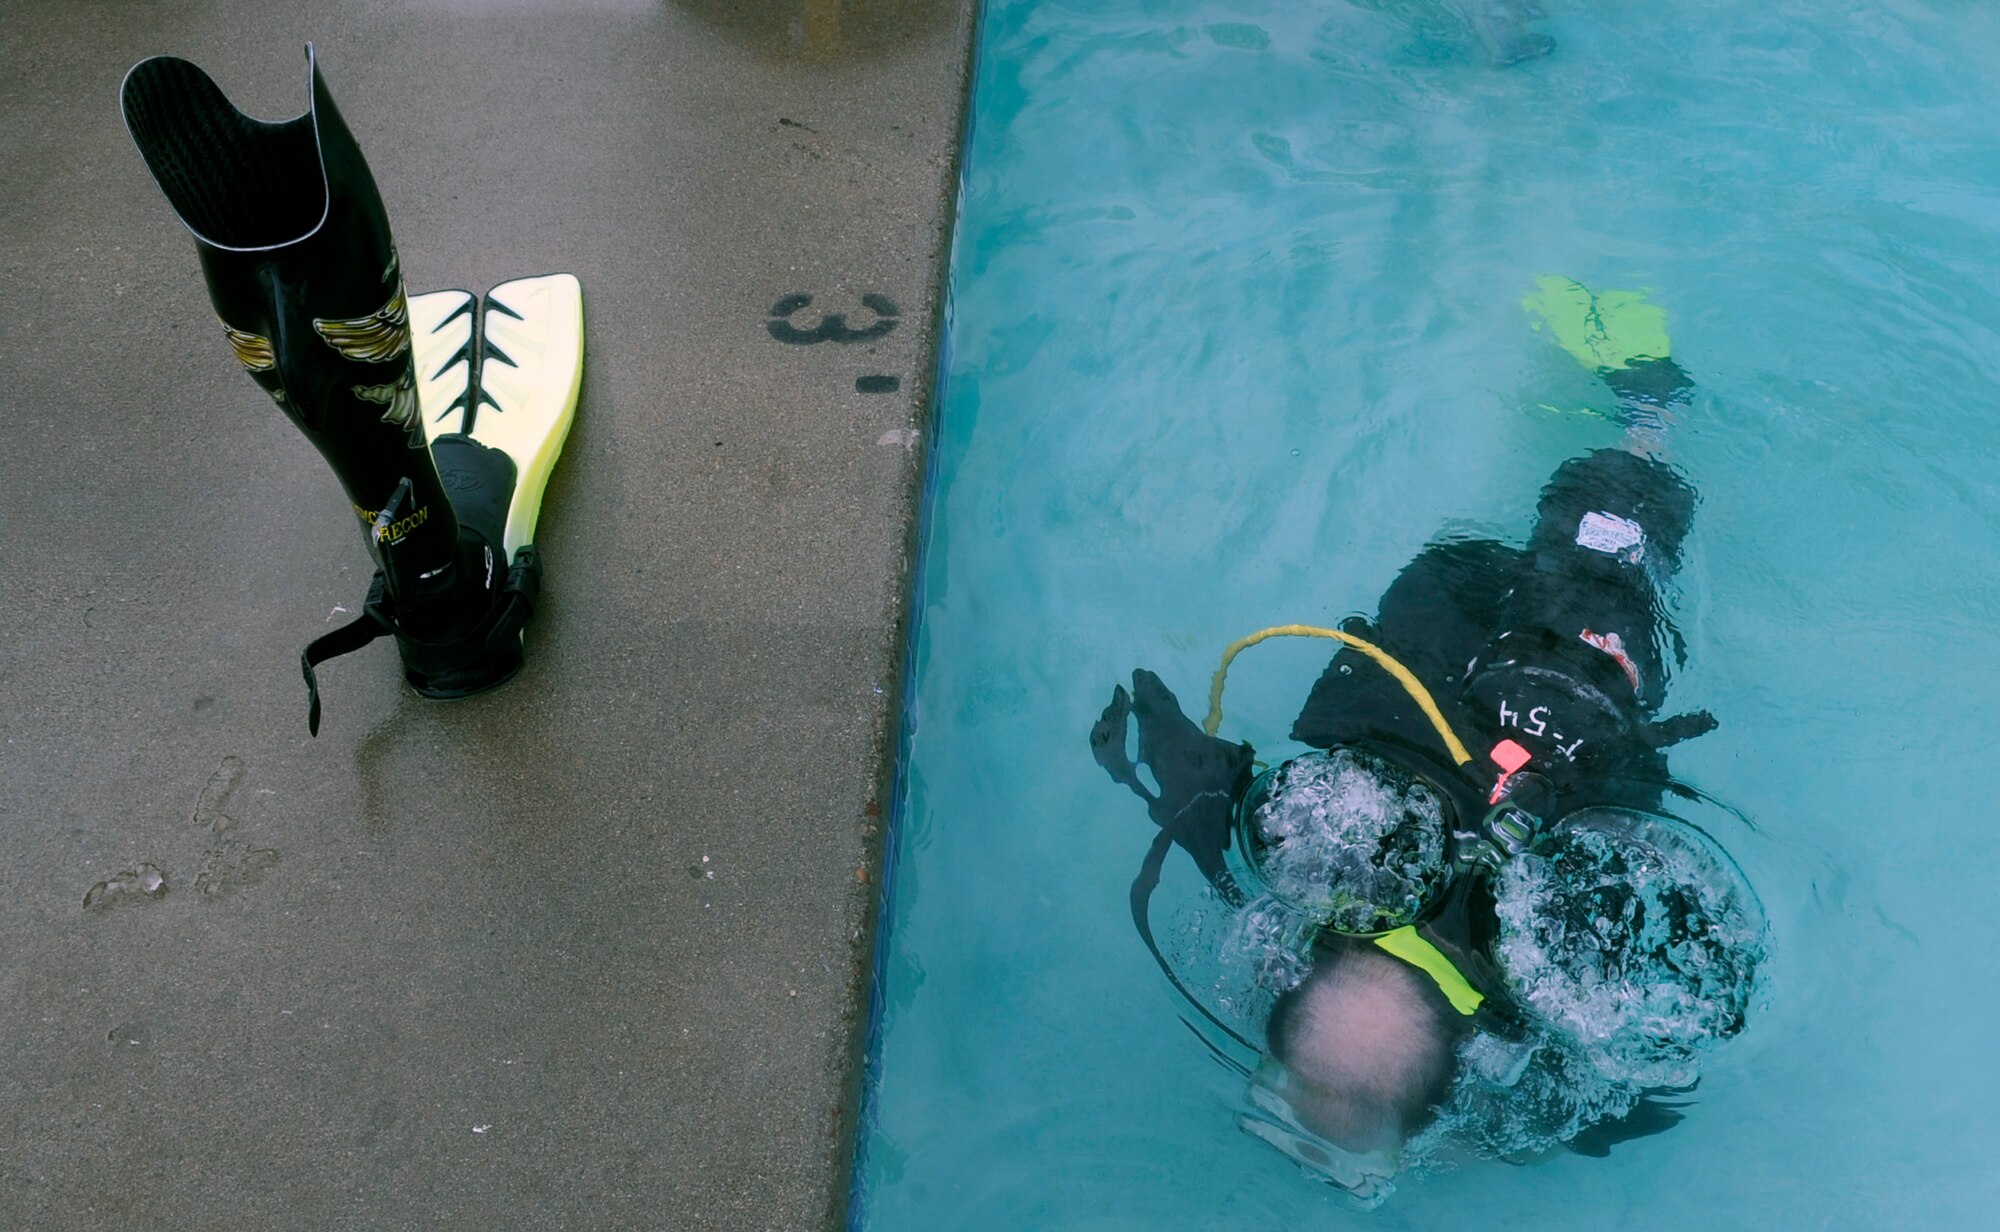 Bill White learns to scuba dive inside a pool at the Silver Tree Hotel during the 23rd National Disabled Veterans Winter Sports Clinic held March at the Snowmass Village, Colo. Mr. White is prior Marine Corps and is from Wood Dale, Ill. (U.S. Air Force photo/Staff Sgt. Desiree N. Palacios)
